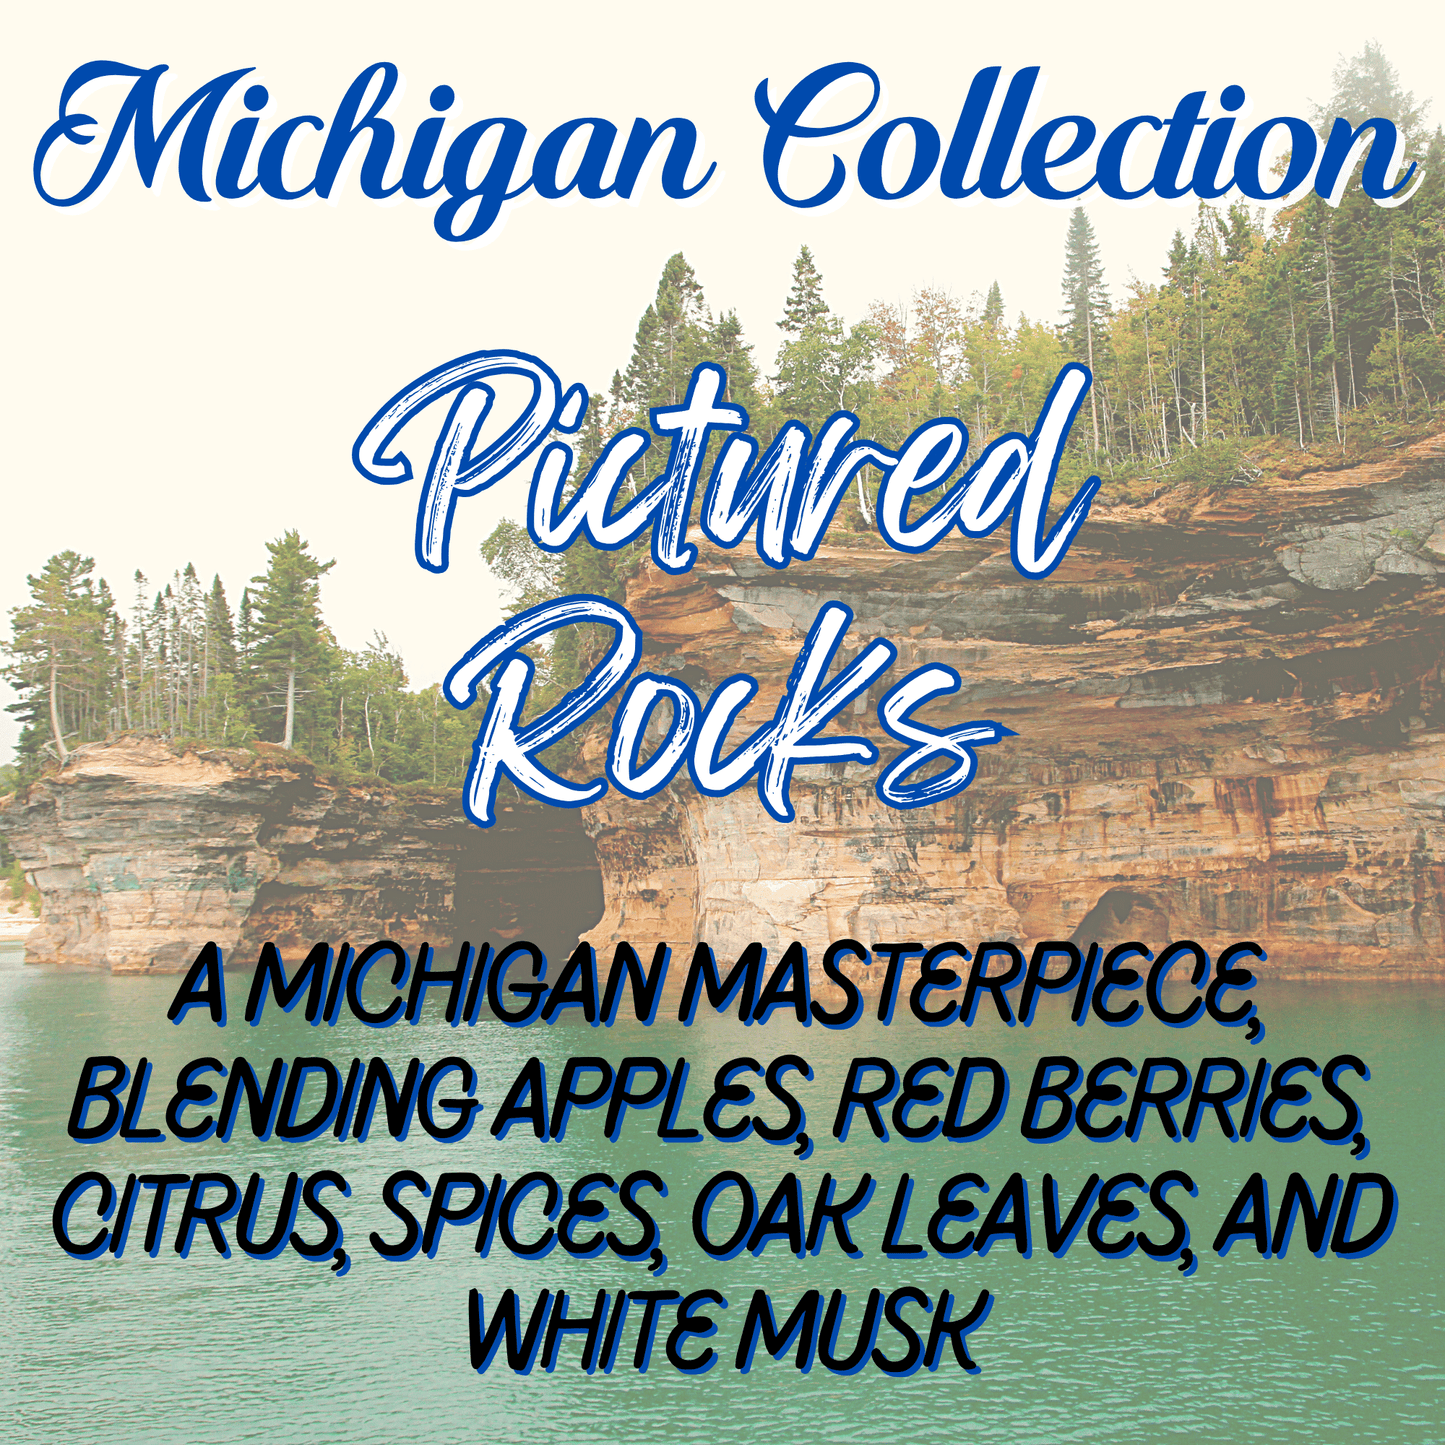 Michigan Whipped Body Butter | Pictured Rocks Inspired Scent | Choice of Size